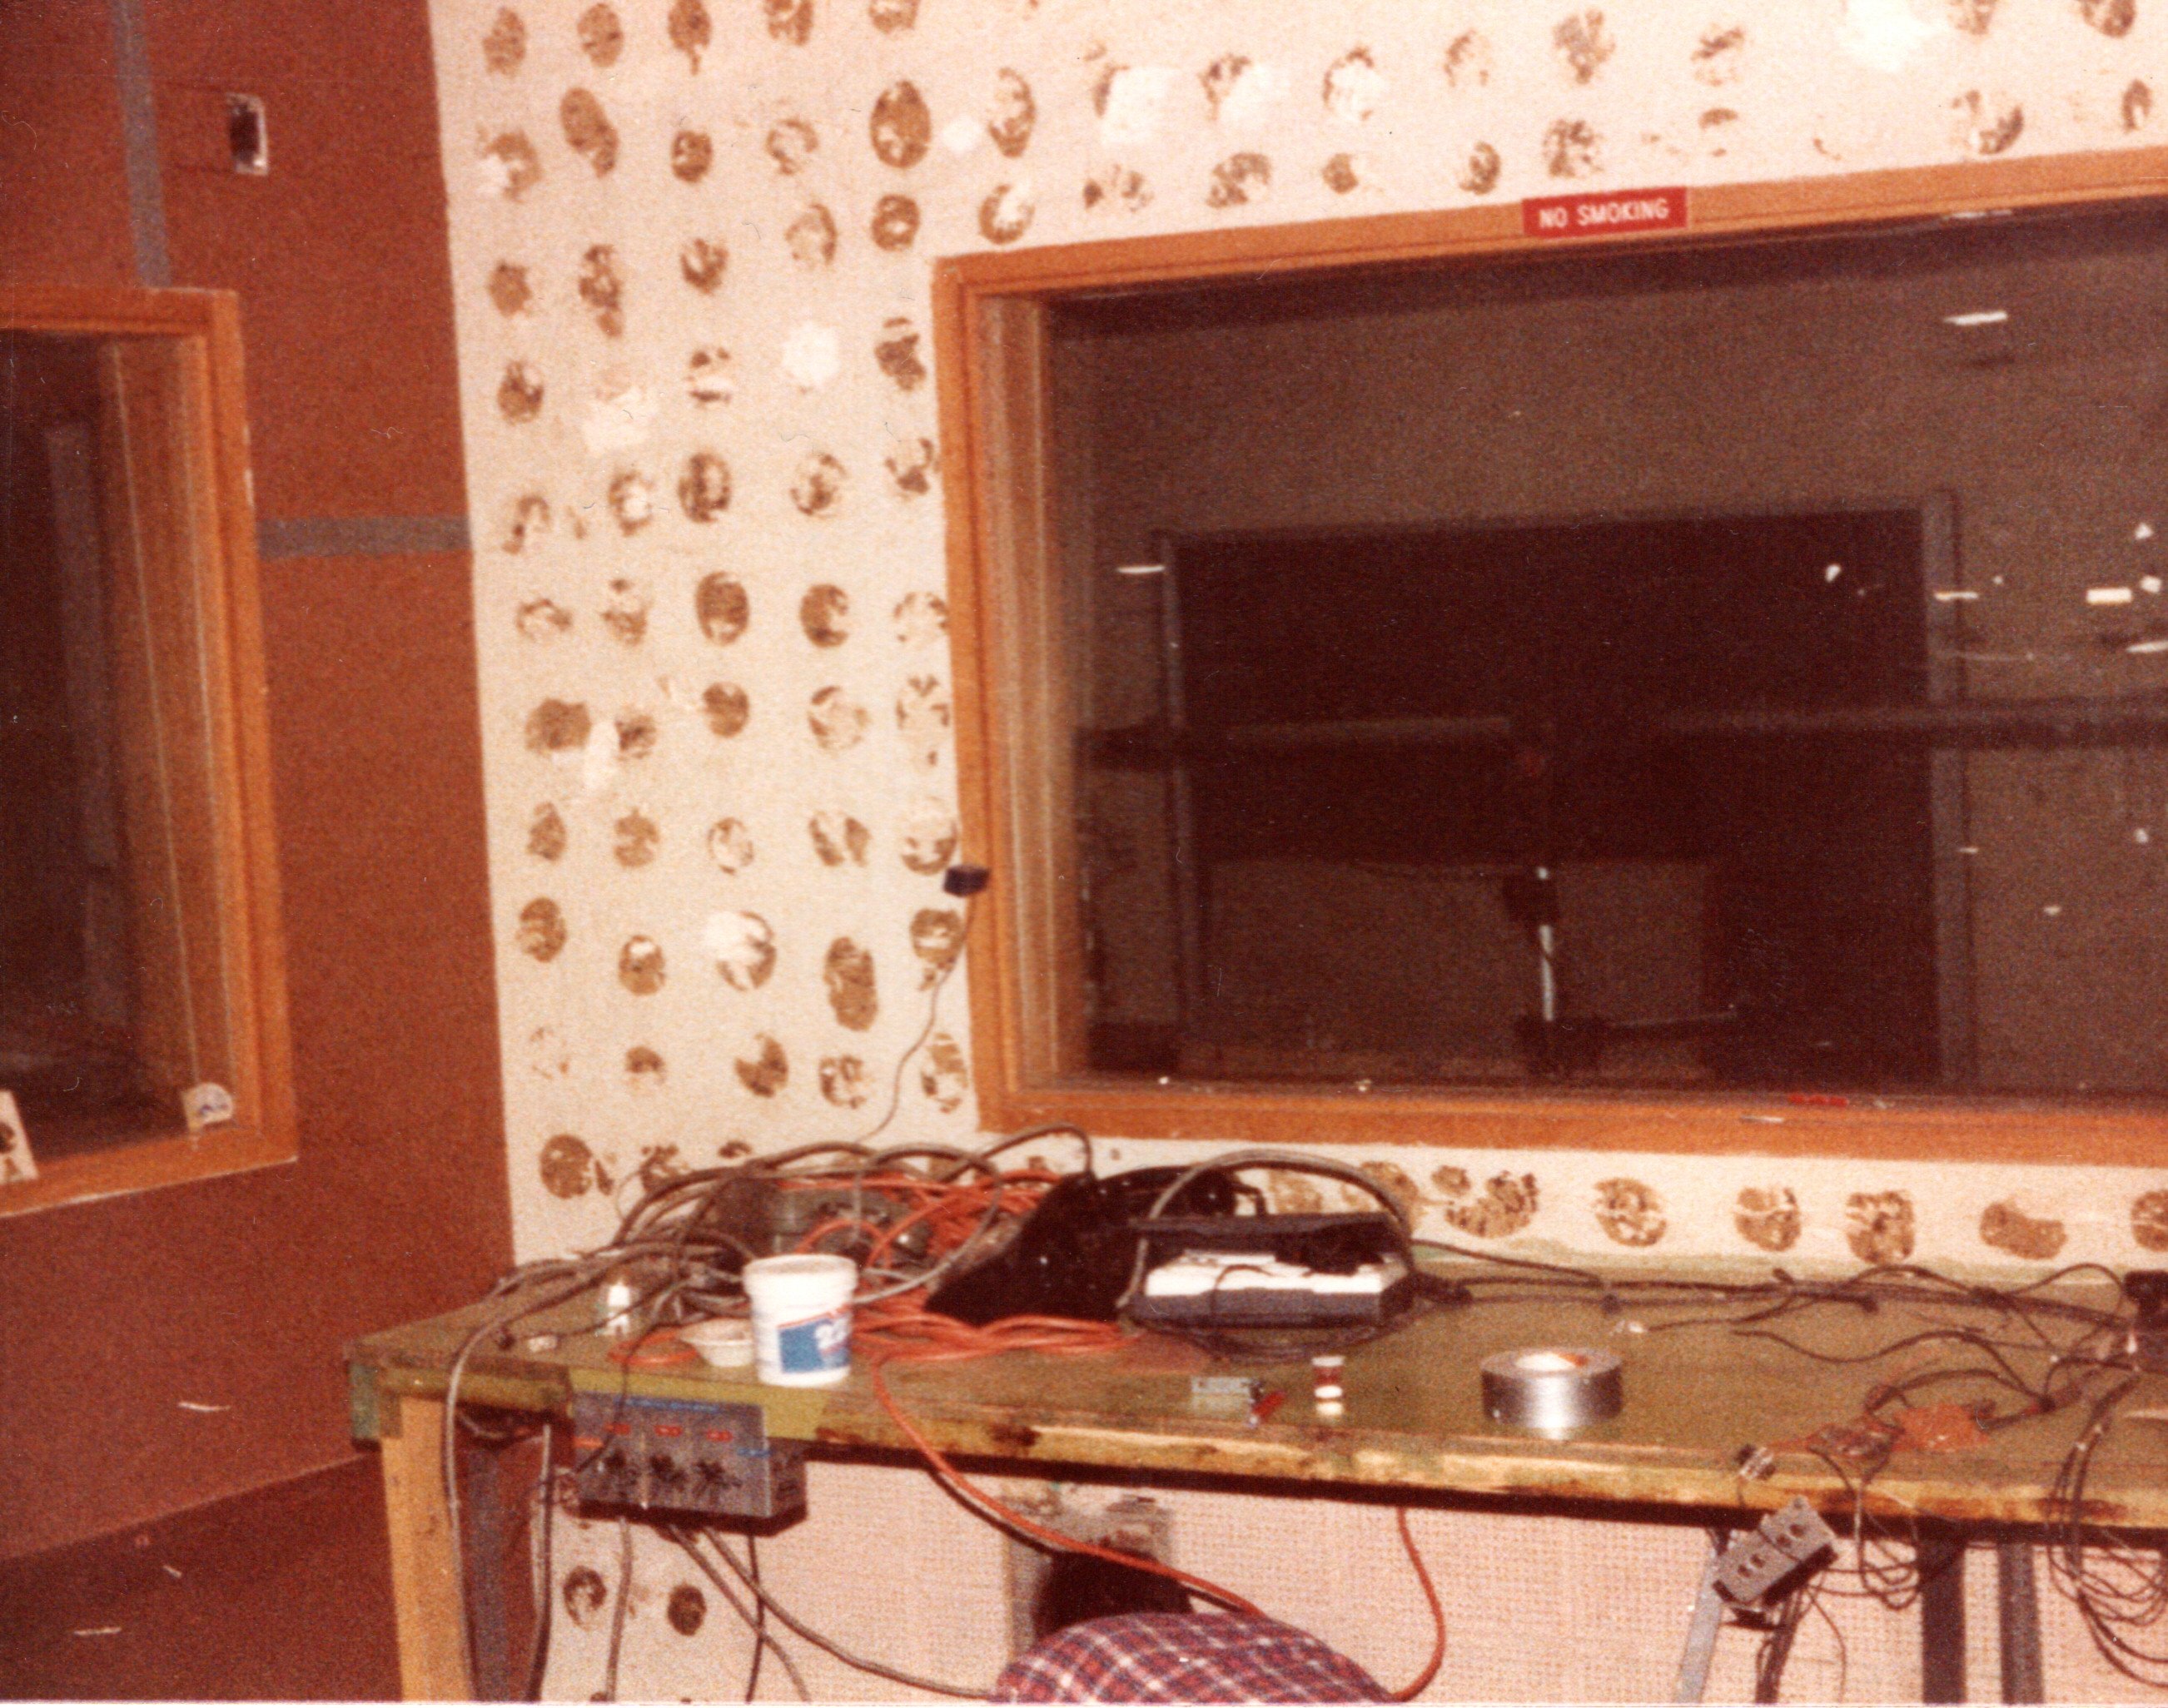 1983 - The rebuild of FM - Fiber Board was used as backing to smooth the wall, and allow for something to mount items